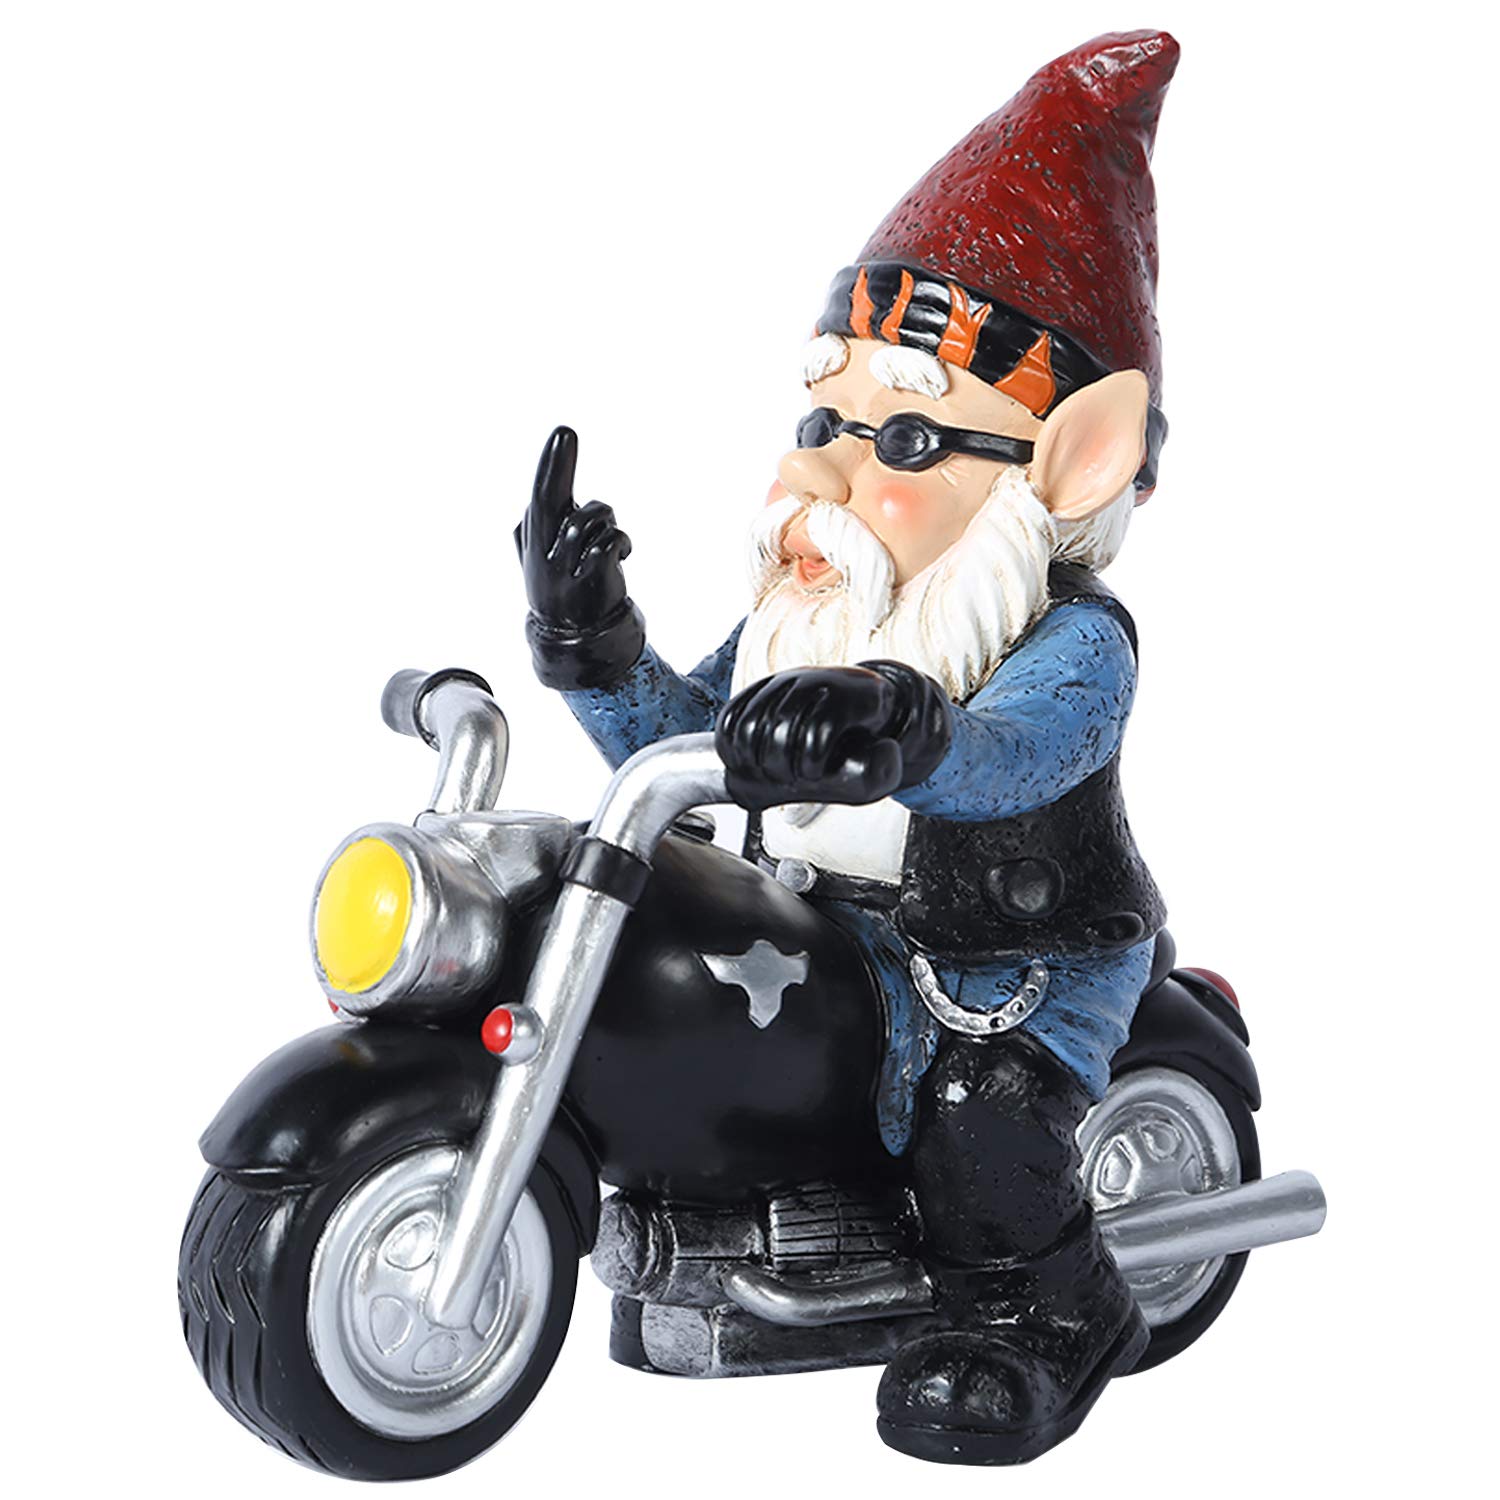 JHWKJS Garden Gnome Riding Motorcycle Funny Outdoor Gnome Decoration Indoor Outdoor Lawn Figurines for Home Yard Décor, Small